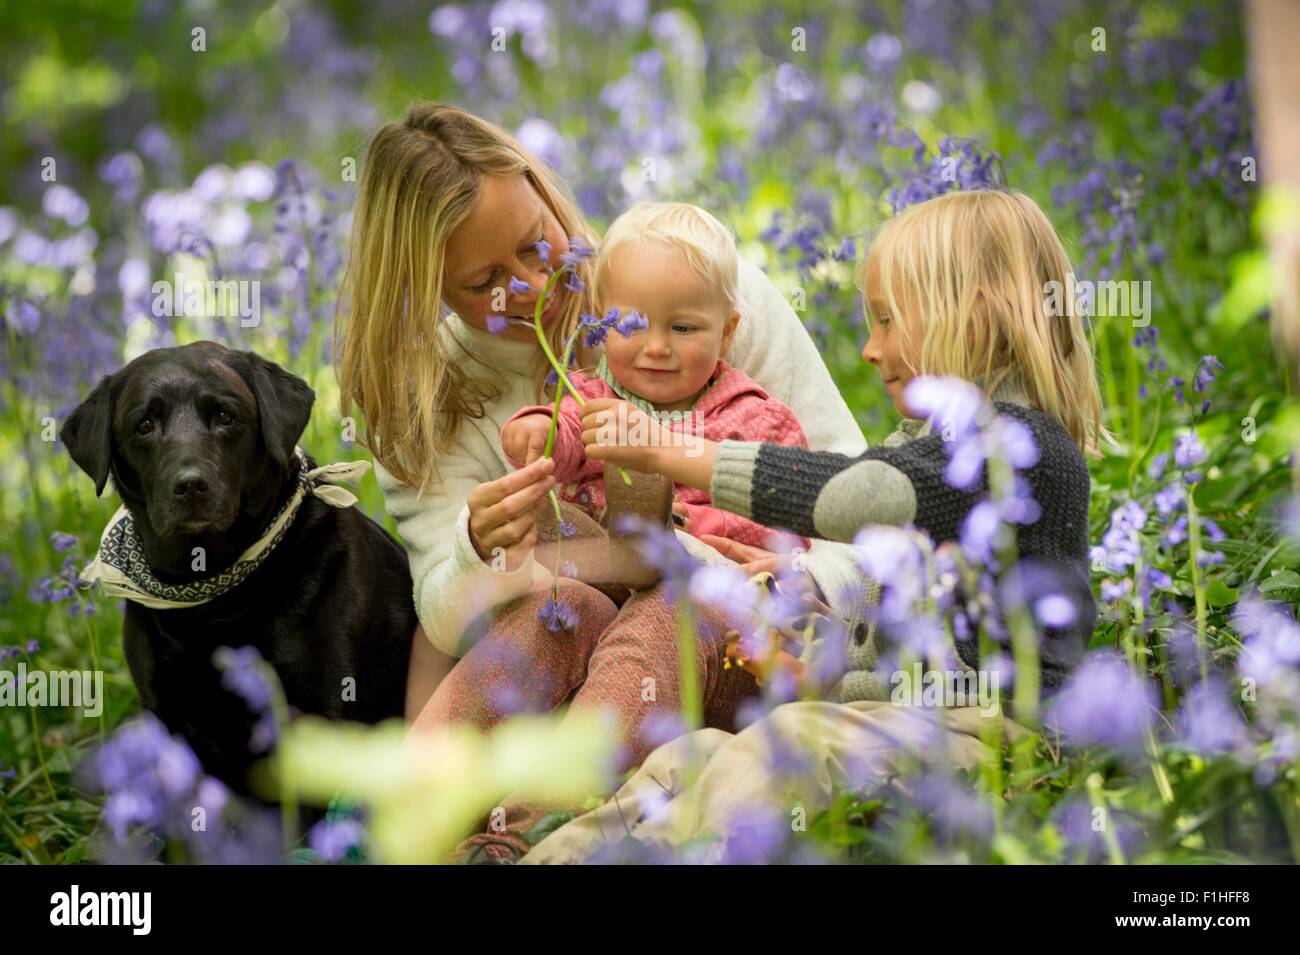 Mother sitting with children and dog in bluebell forest Stock Photo